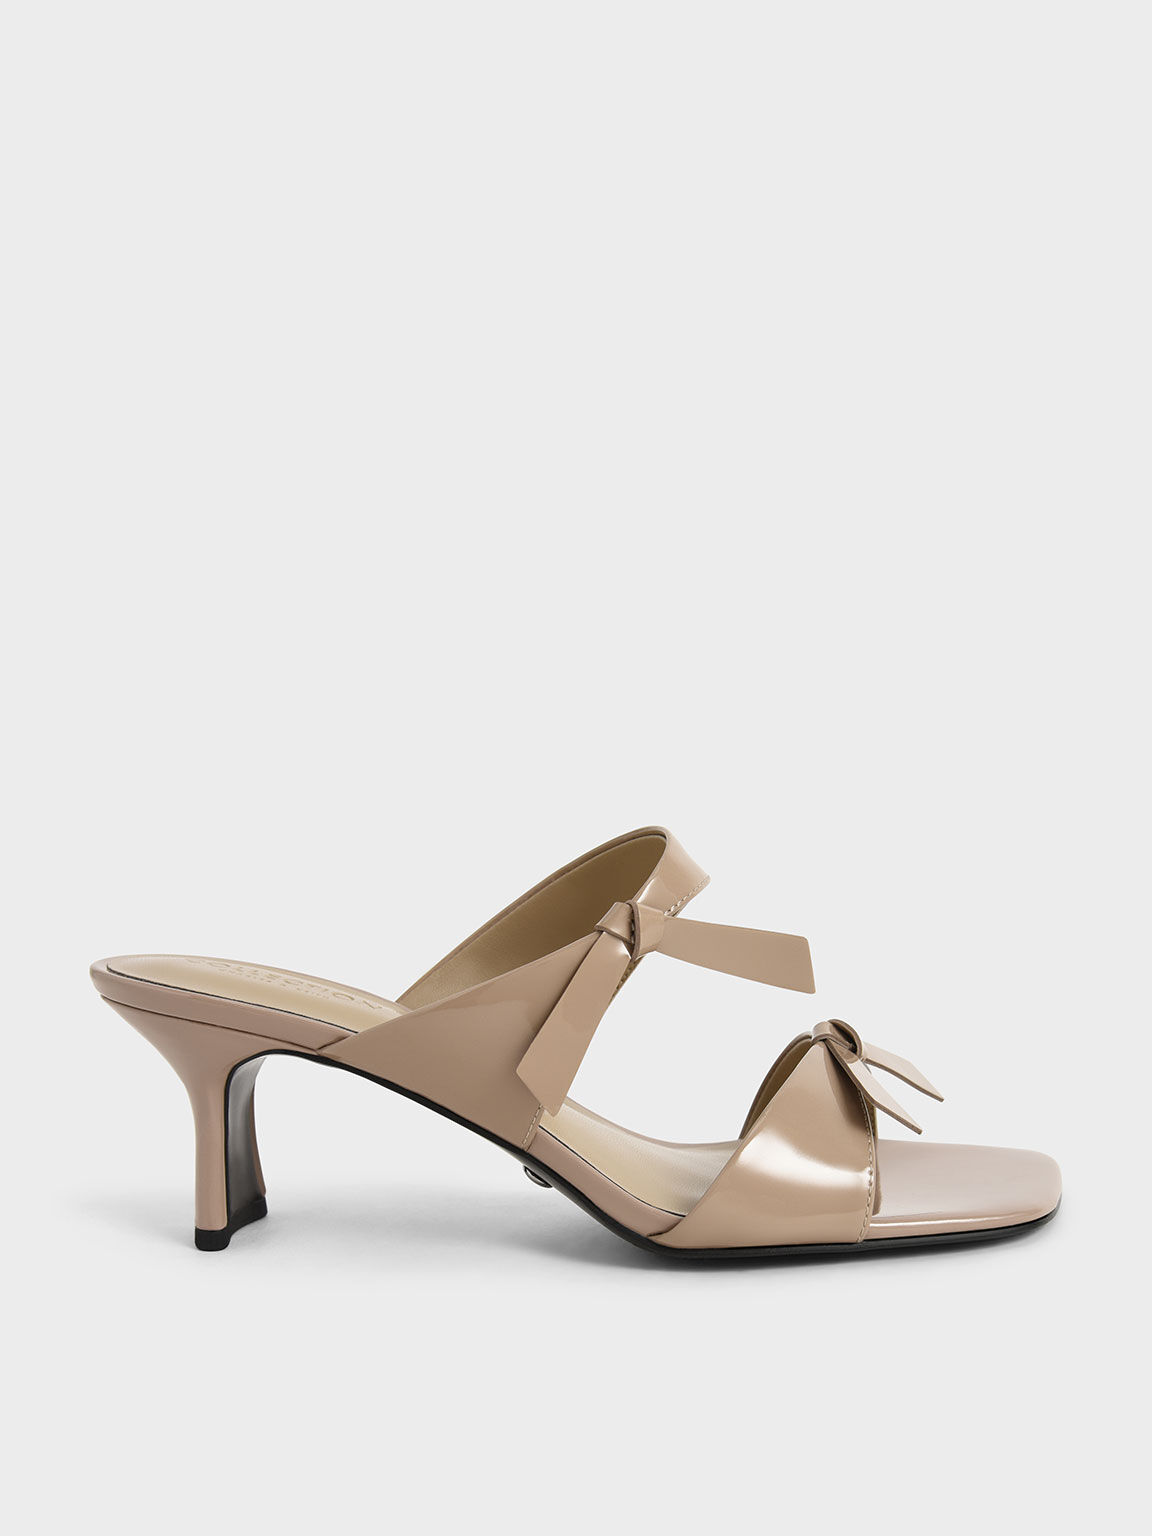 Patent Leather Bow-Tie Blade Heel Mules, Taupe, hi-res